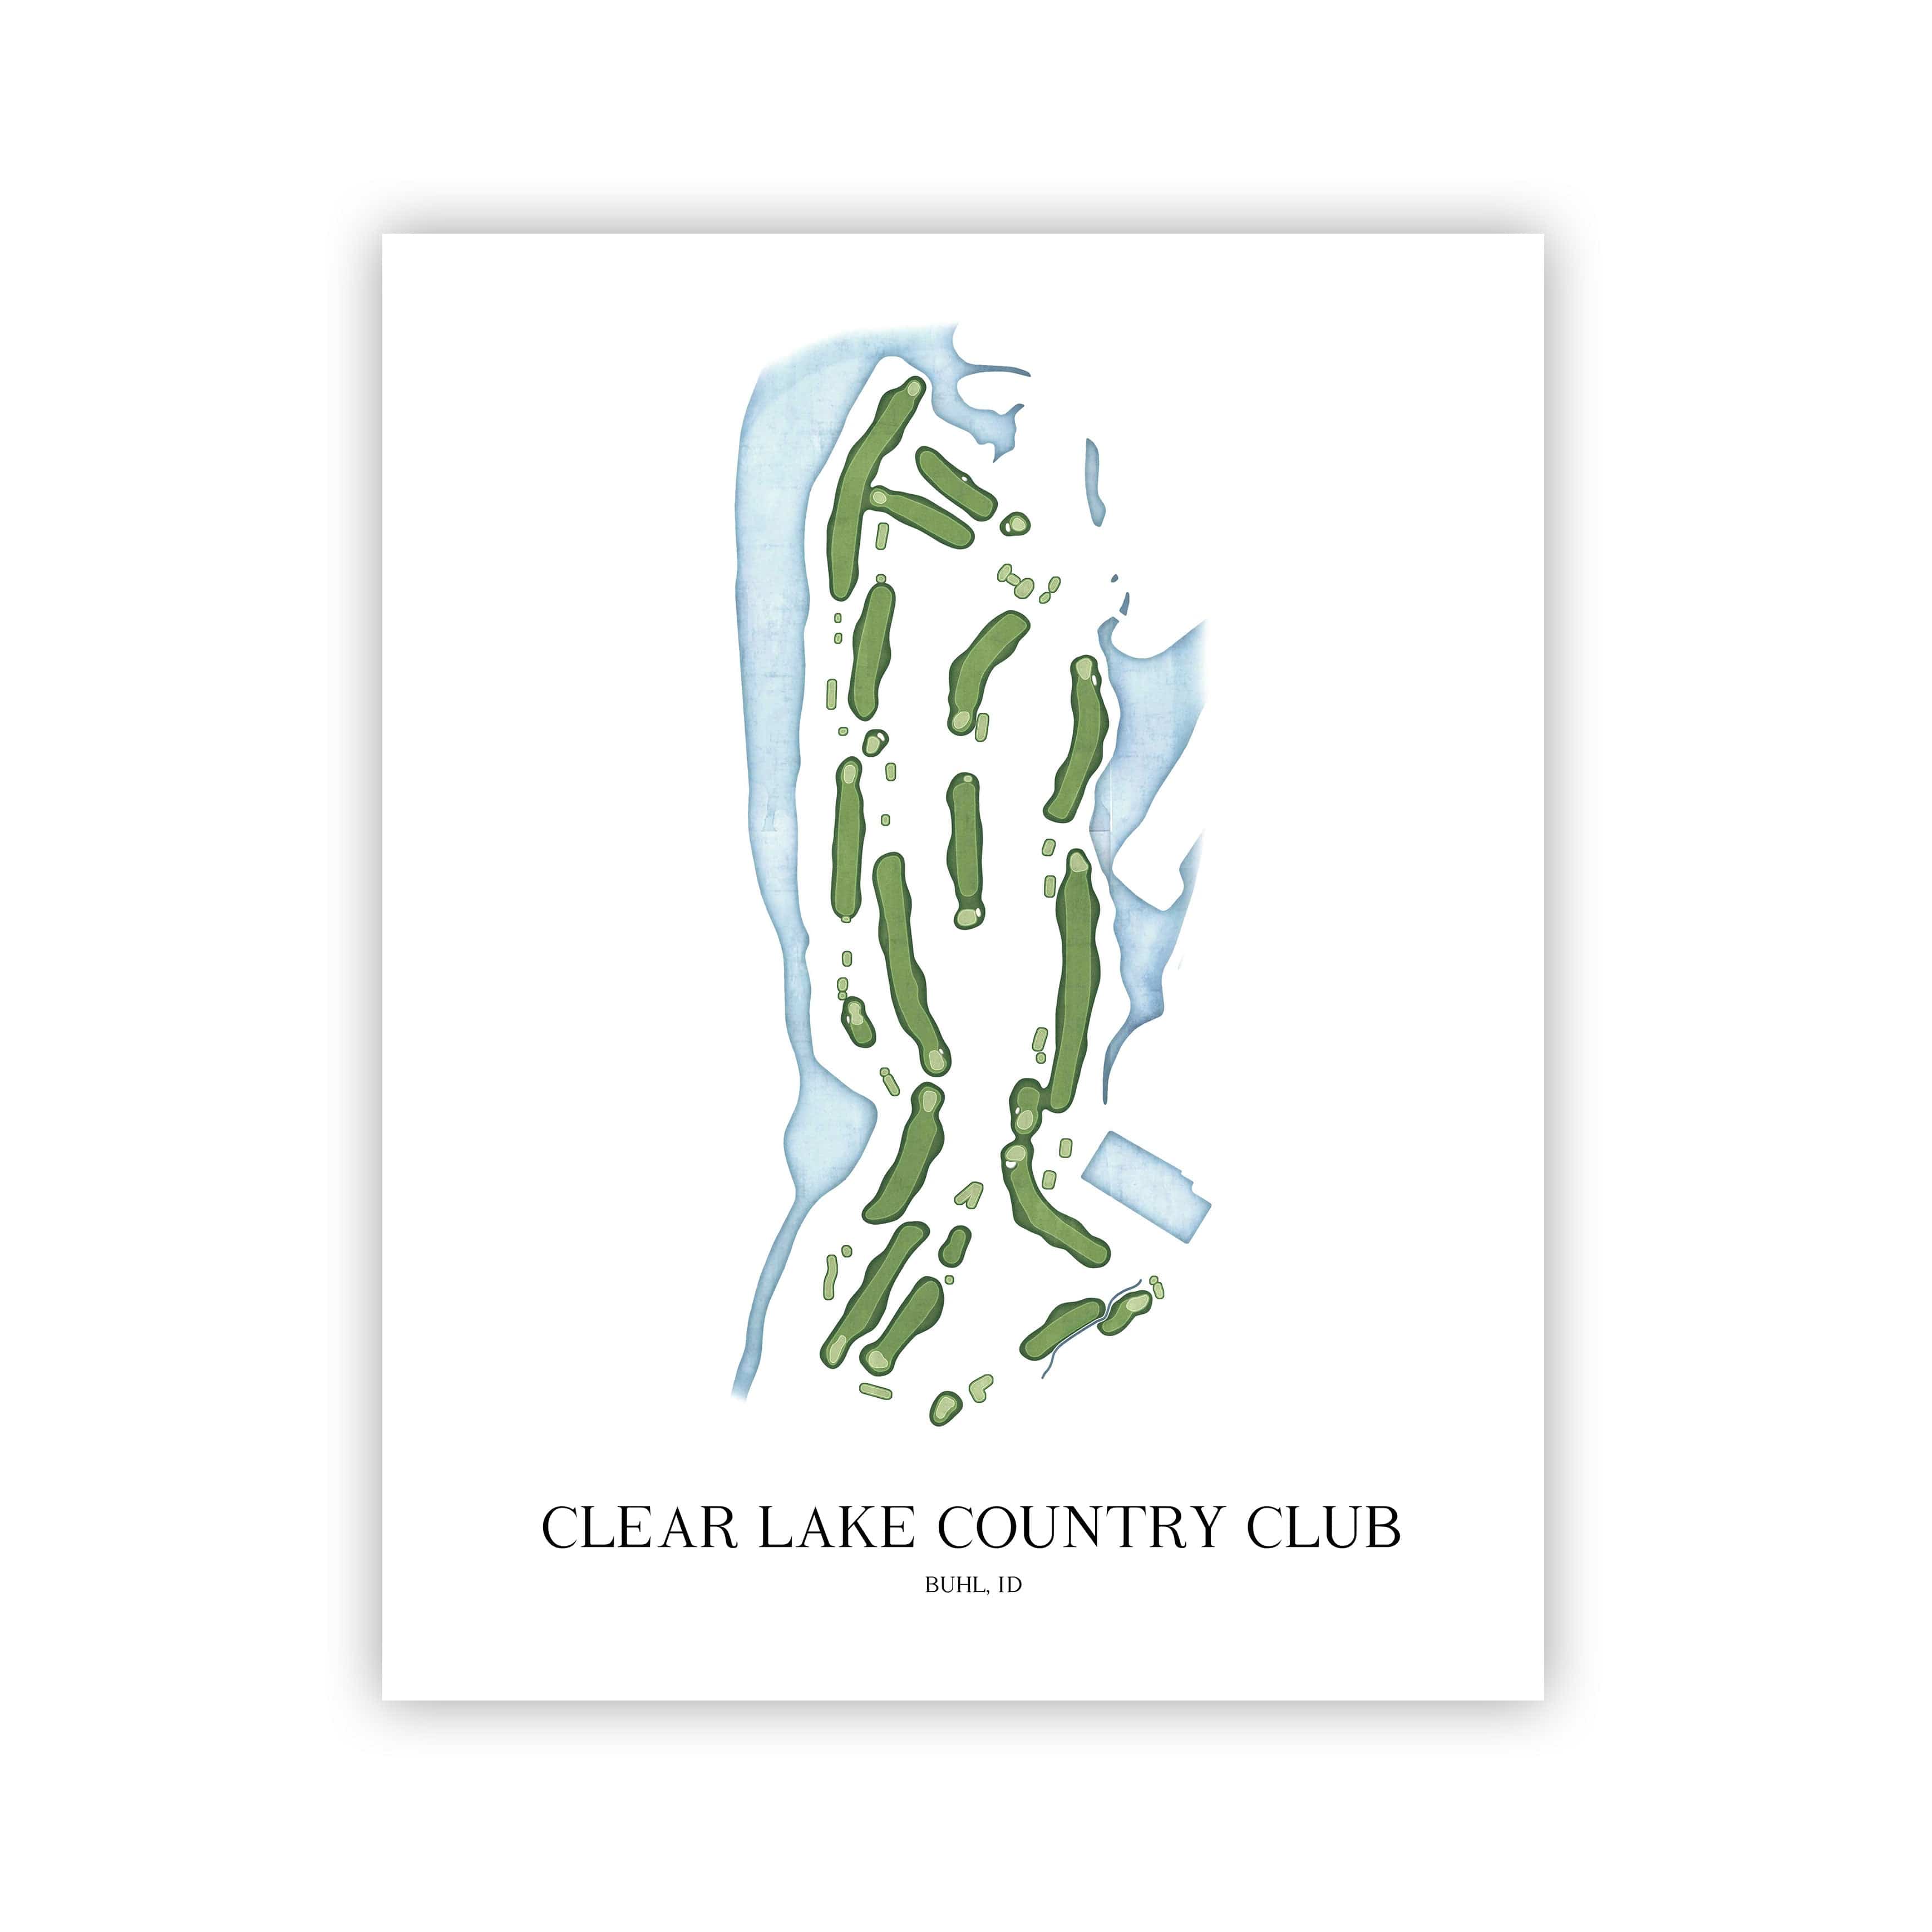 The 19th Hole Golf Shop - Golf Course Prints -  Clear Lake Country Club Golf Course Map